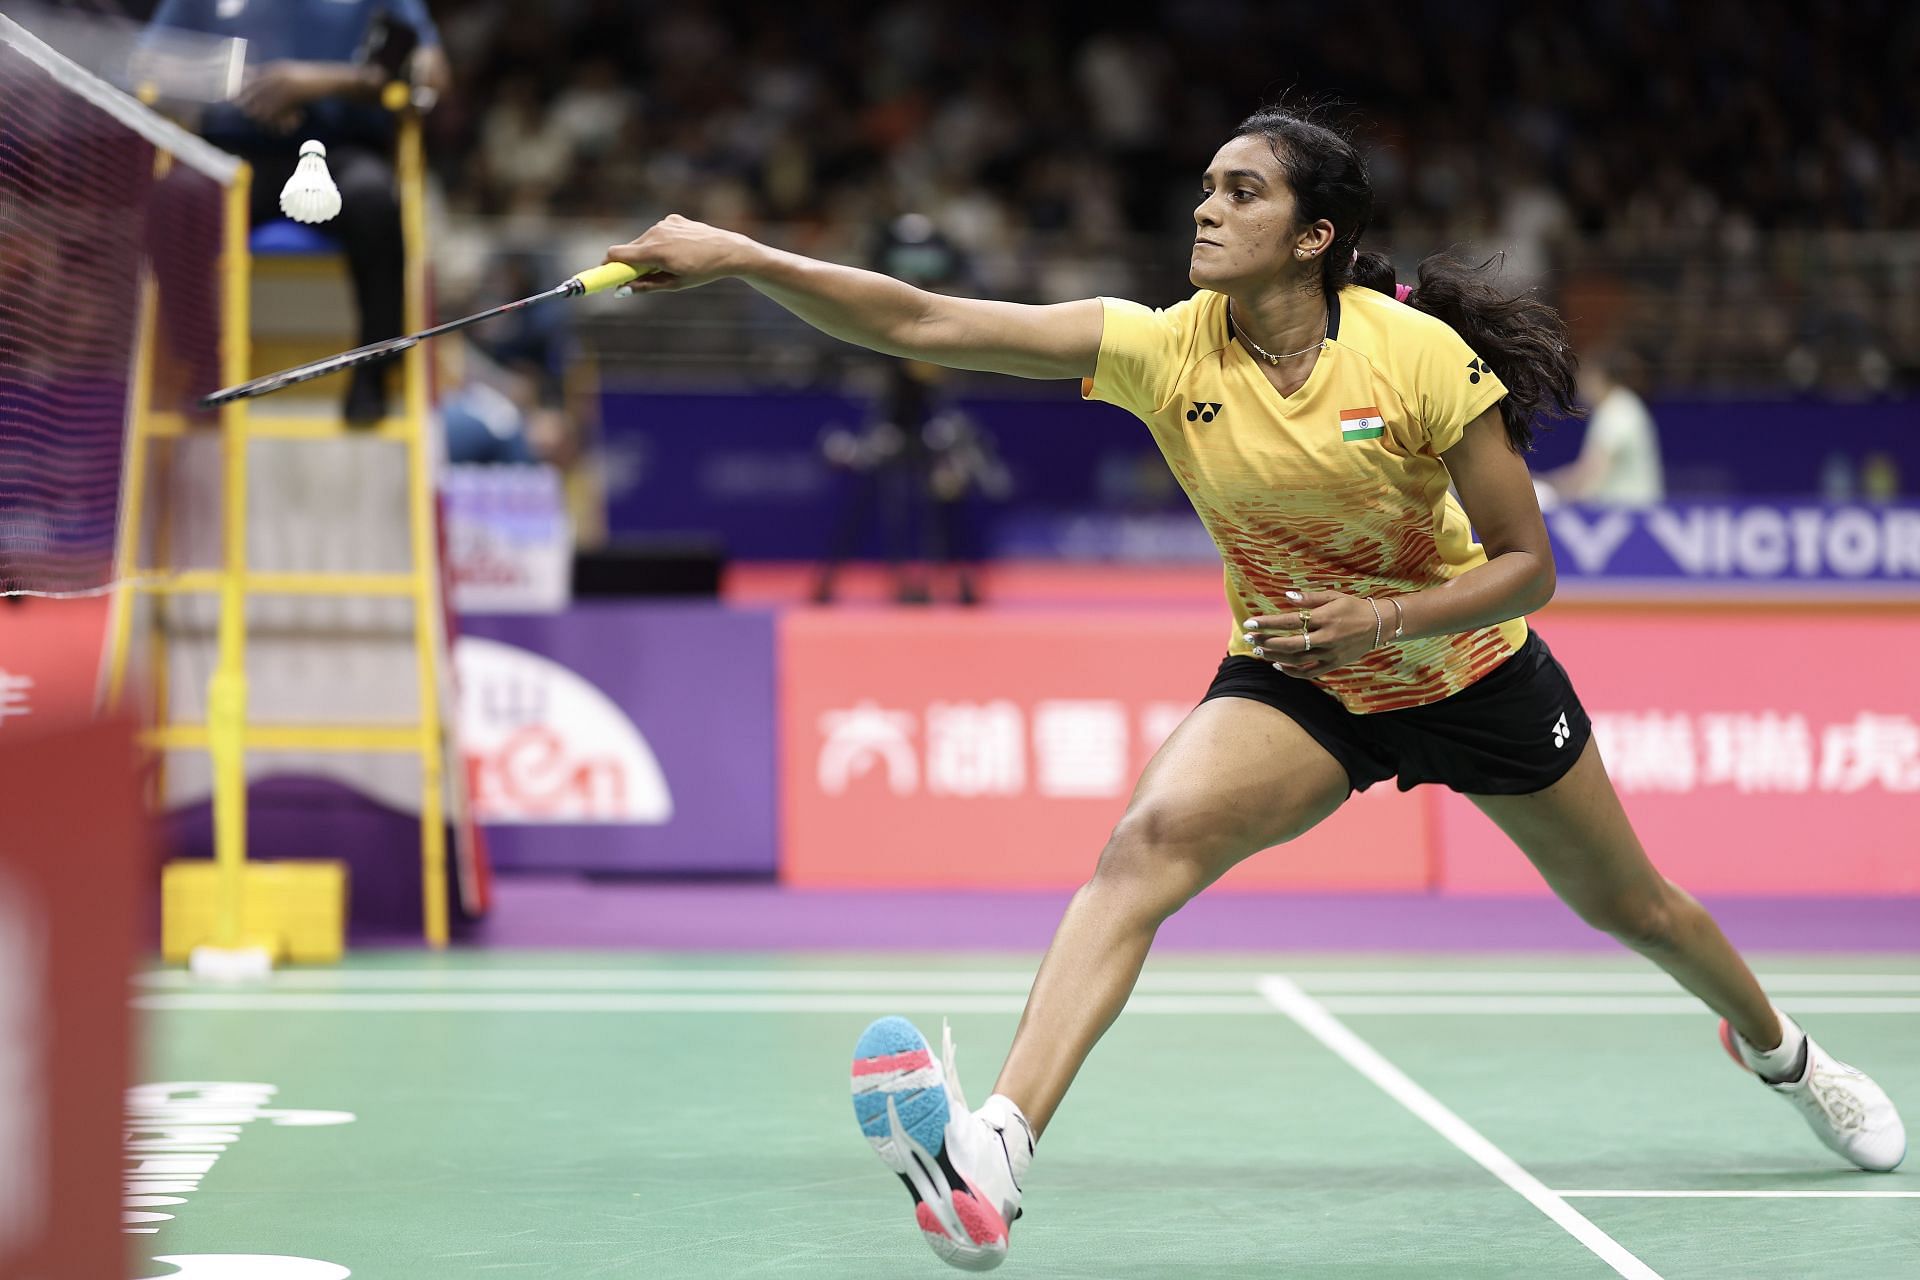 Australian Open Badminton 2023 PV Sindhu vs Beiwen Zhang, head-to-head, prediction, where to watch and live streaming details